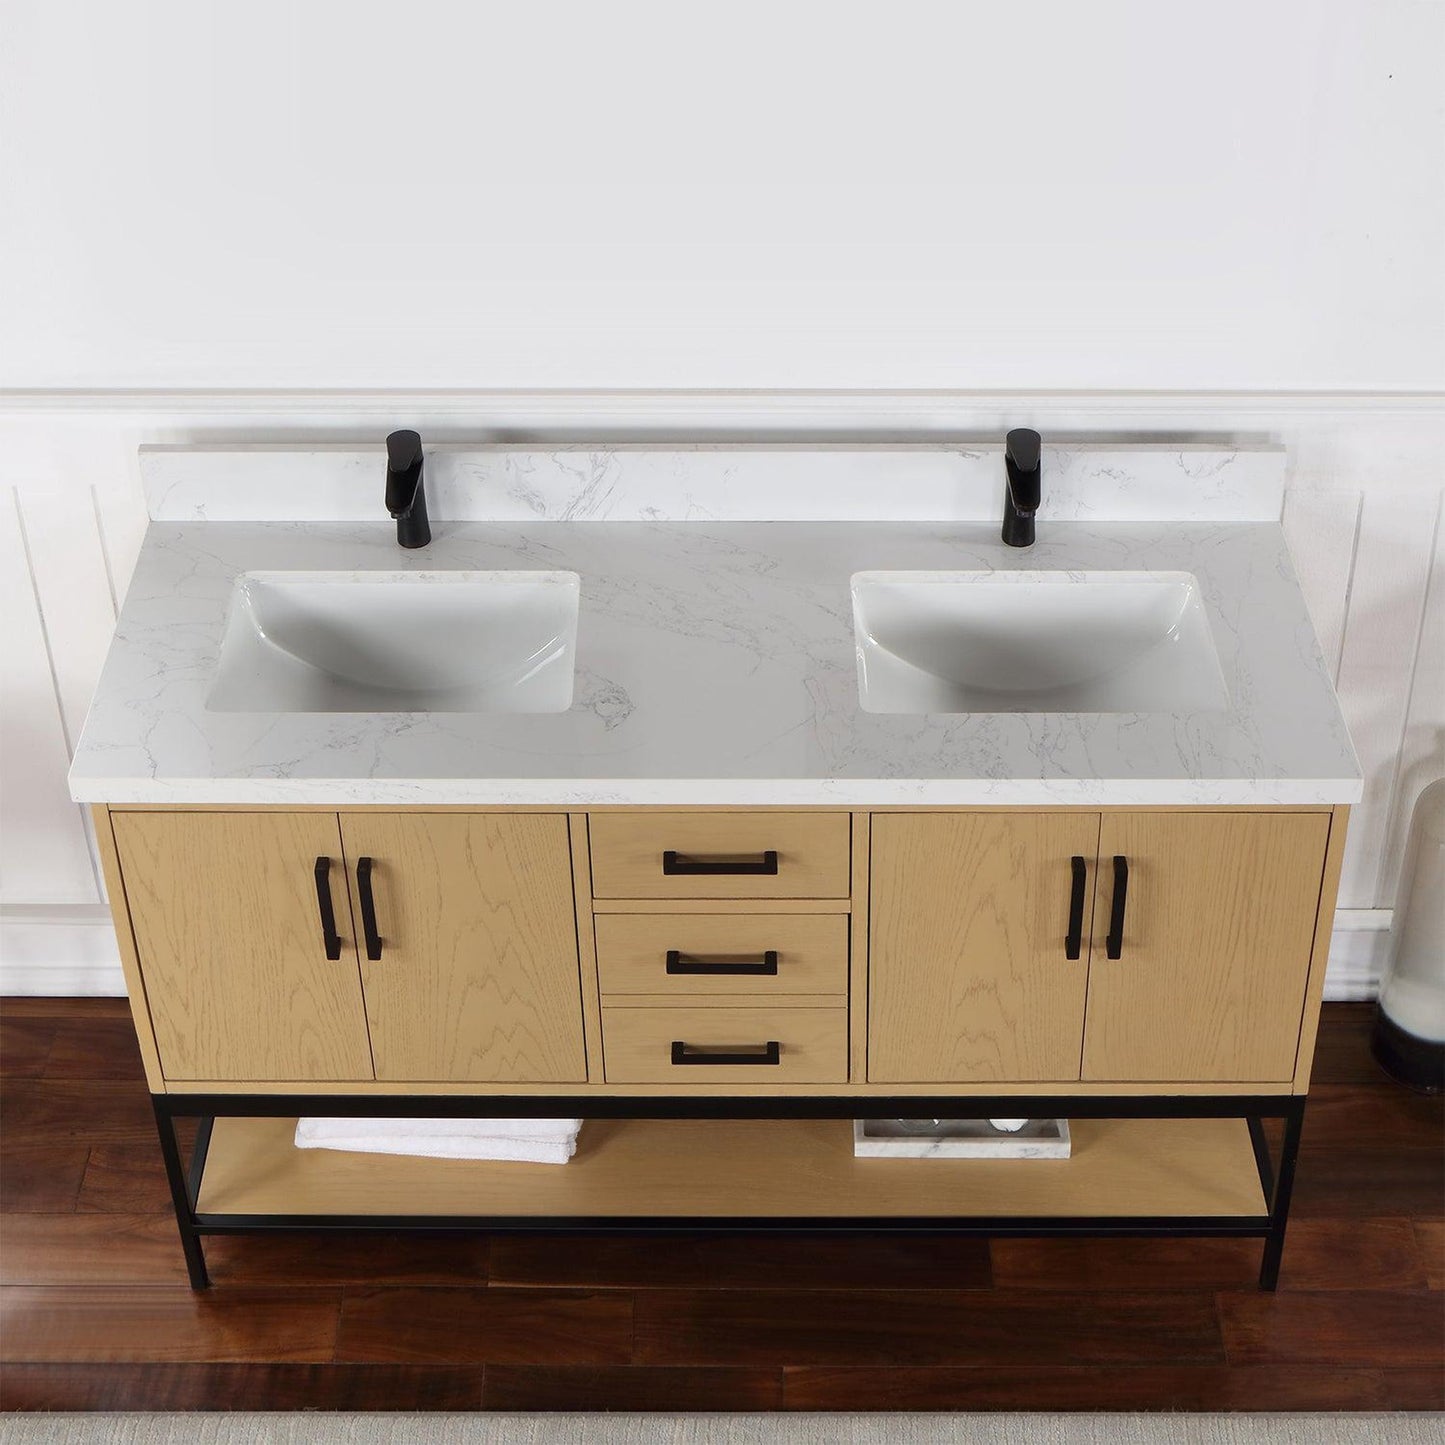 Altair Wildy 60" Washed Oak Freestanding Double Bathroom Vanity Set With Stylish Composite Grain White Stone Top, Two Rectangular Undermount Ceramic Sinks, Overflow, and Backsplash